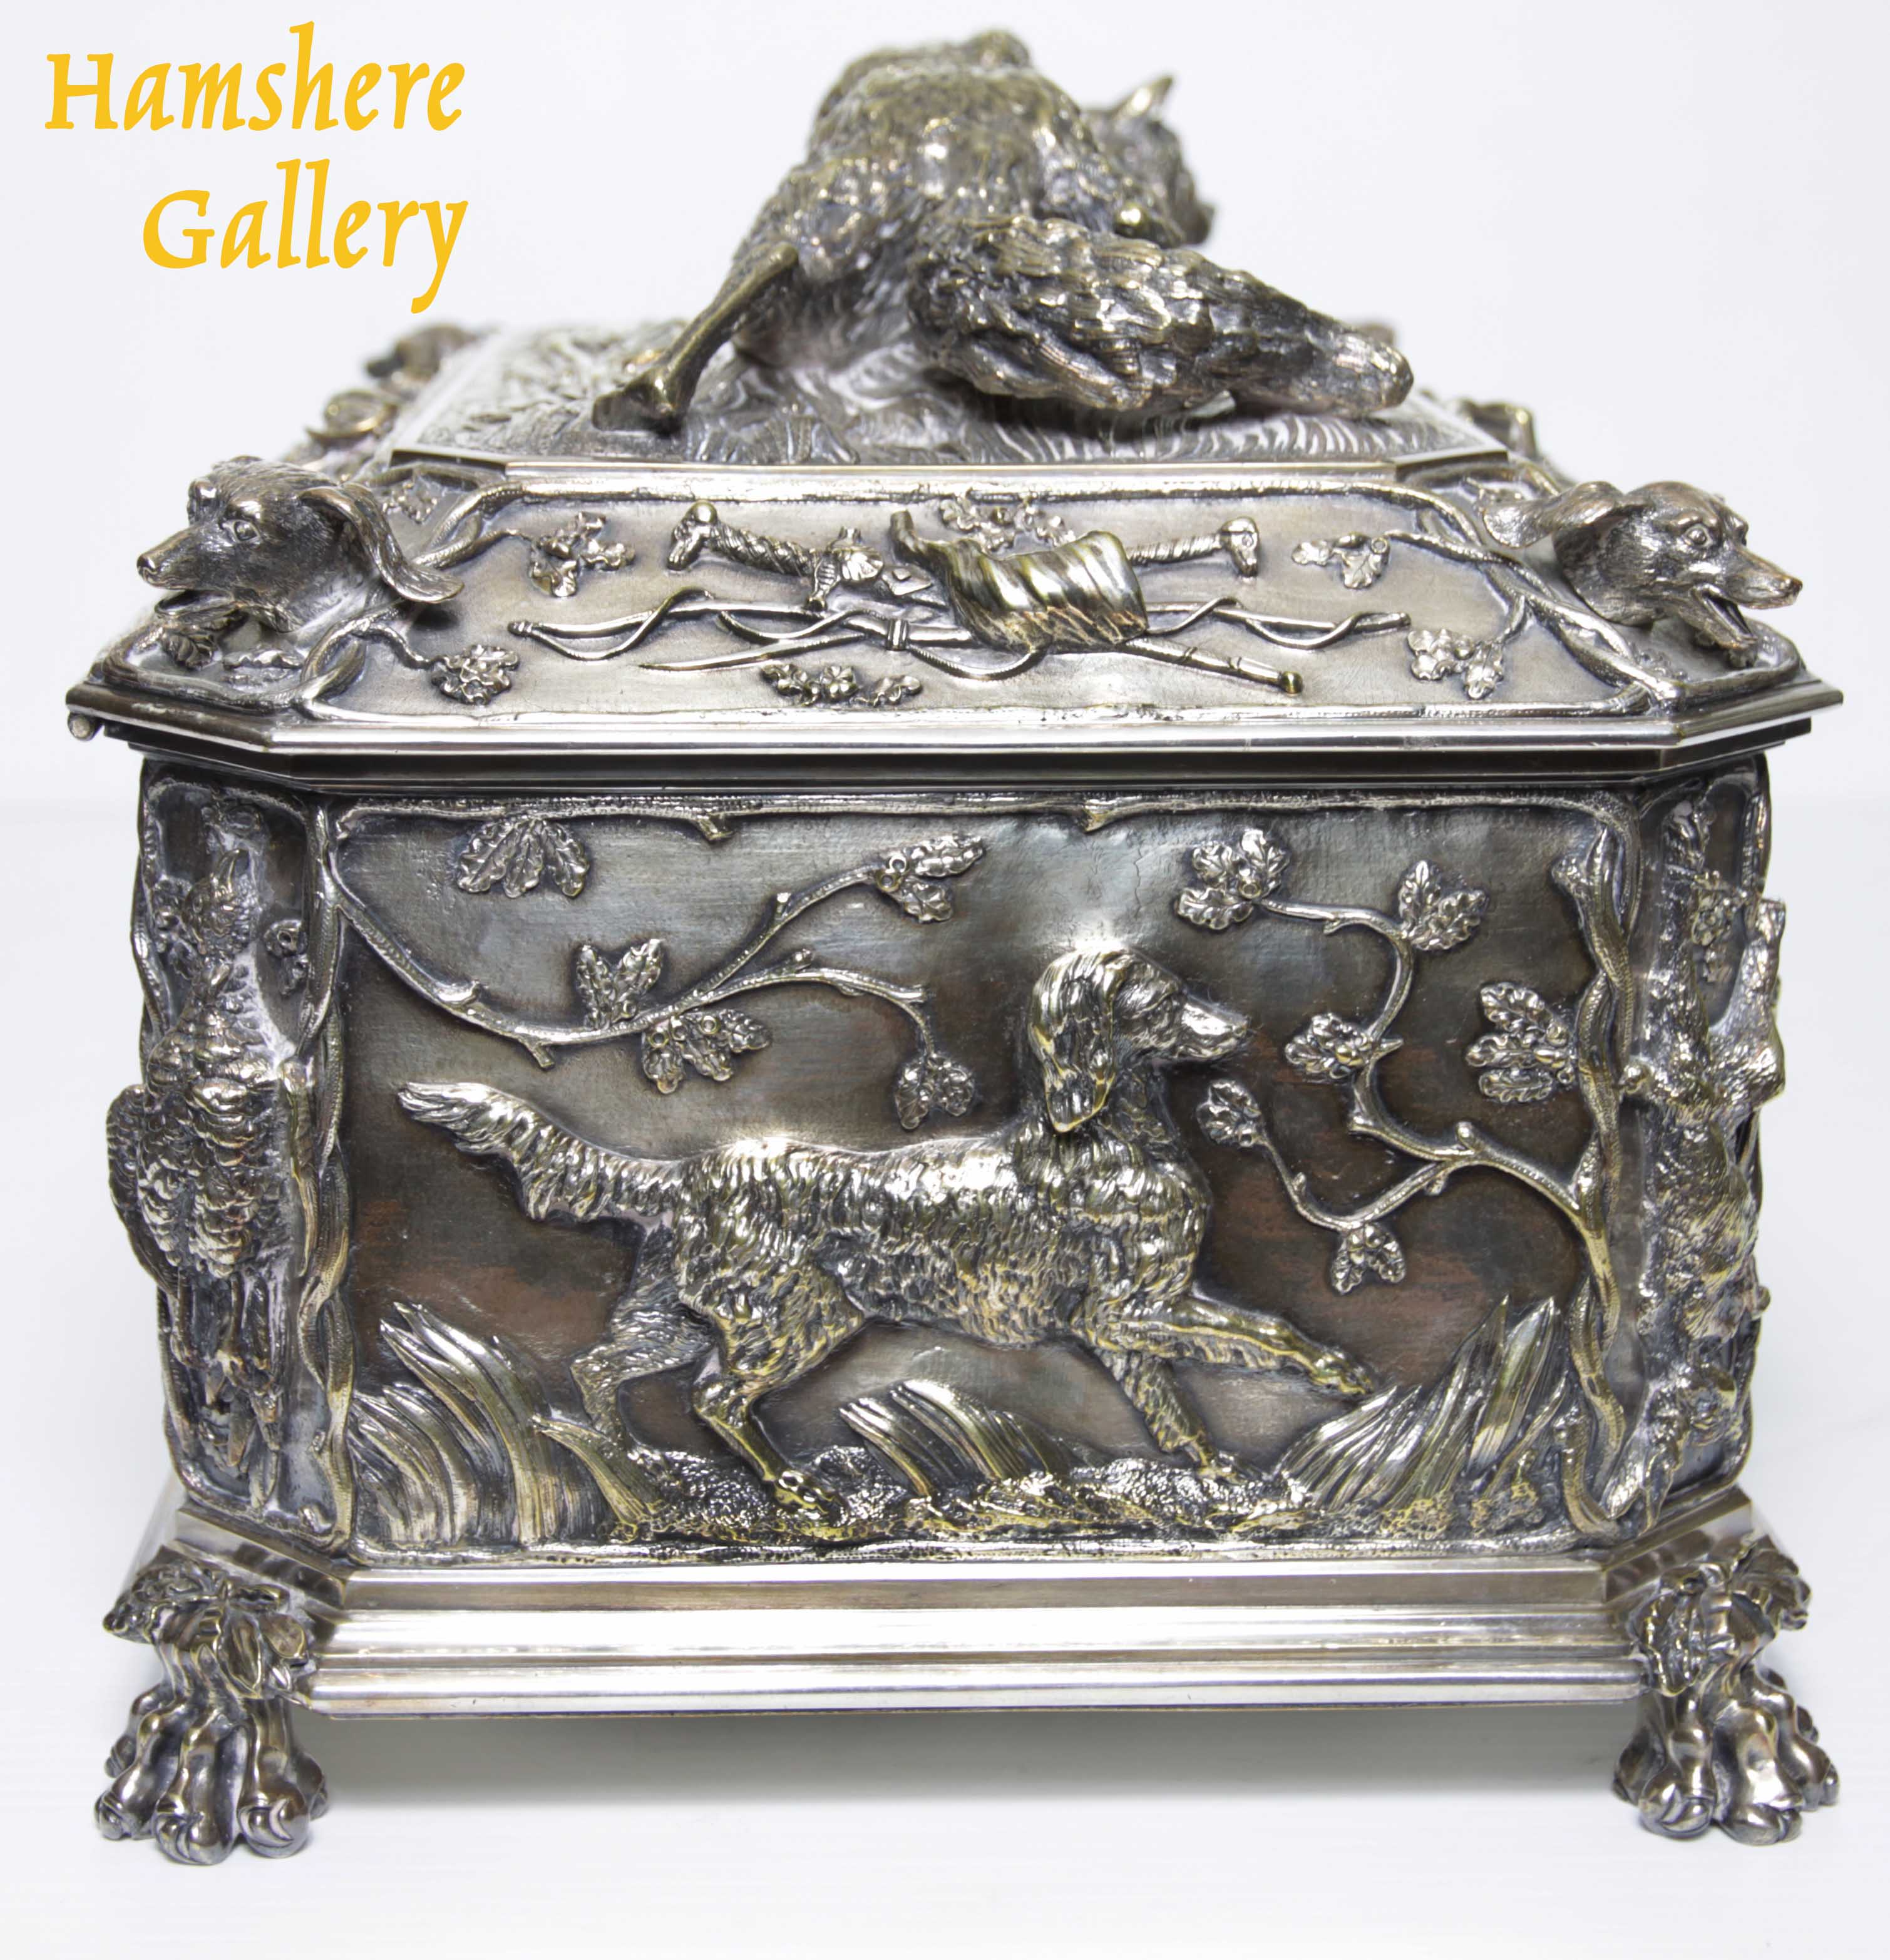 Click to see full size: A very large, French, 19th century, silver bronze hunting / â€œLa Chasseâ€ jewellery box / casket of boar, fox, hound and game bird, attributable to Jules Moigniez (French, 1835-1894)- A very large, French, 19th century, silver bronze hunting / â€œLa Chasseâ€ jewellery box / casket of boar, fox, hound and game bird, attributable to Jules Moigniez (French, 1835-1894)